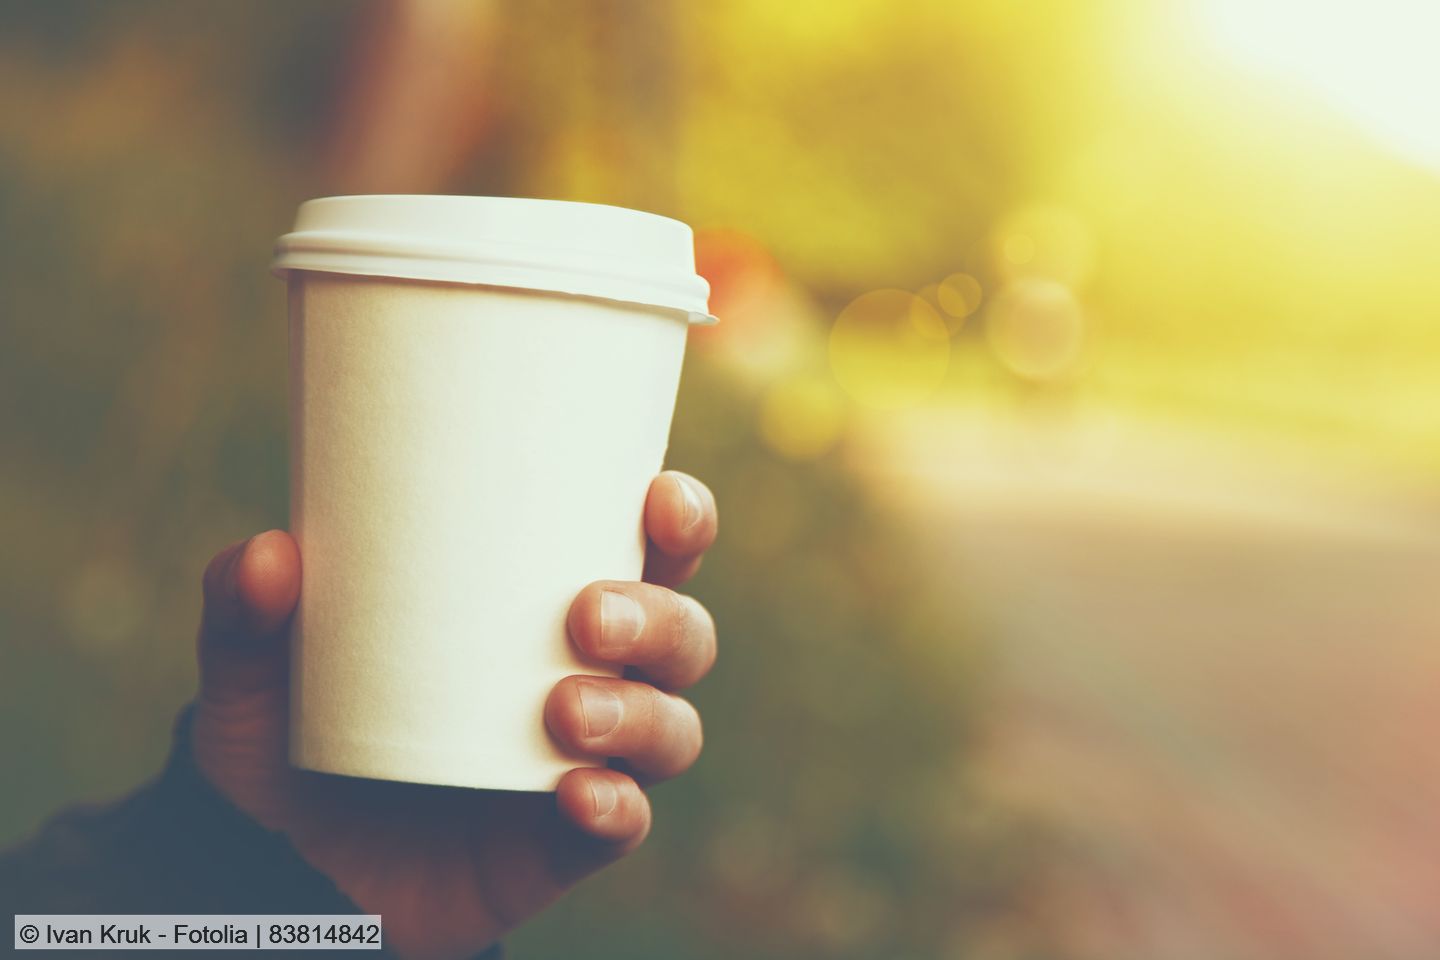 Hand holding a disposable coffee cup with a plastic lid